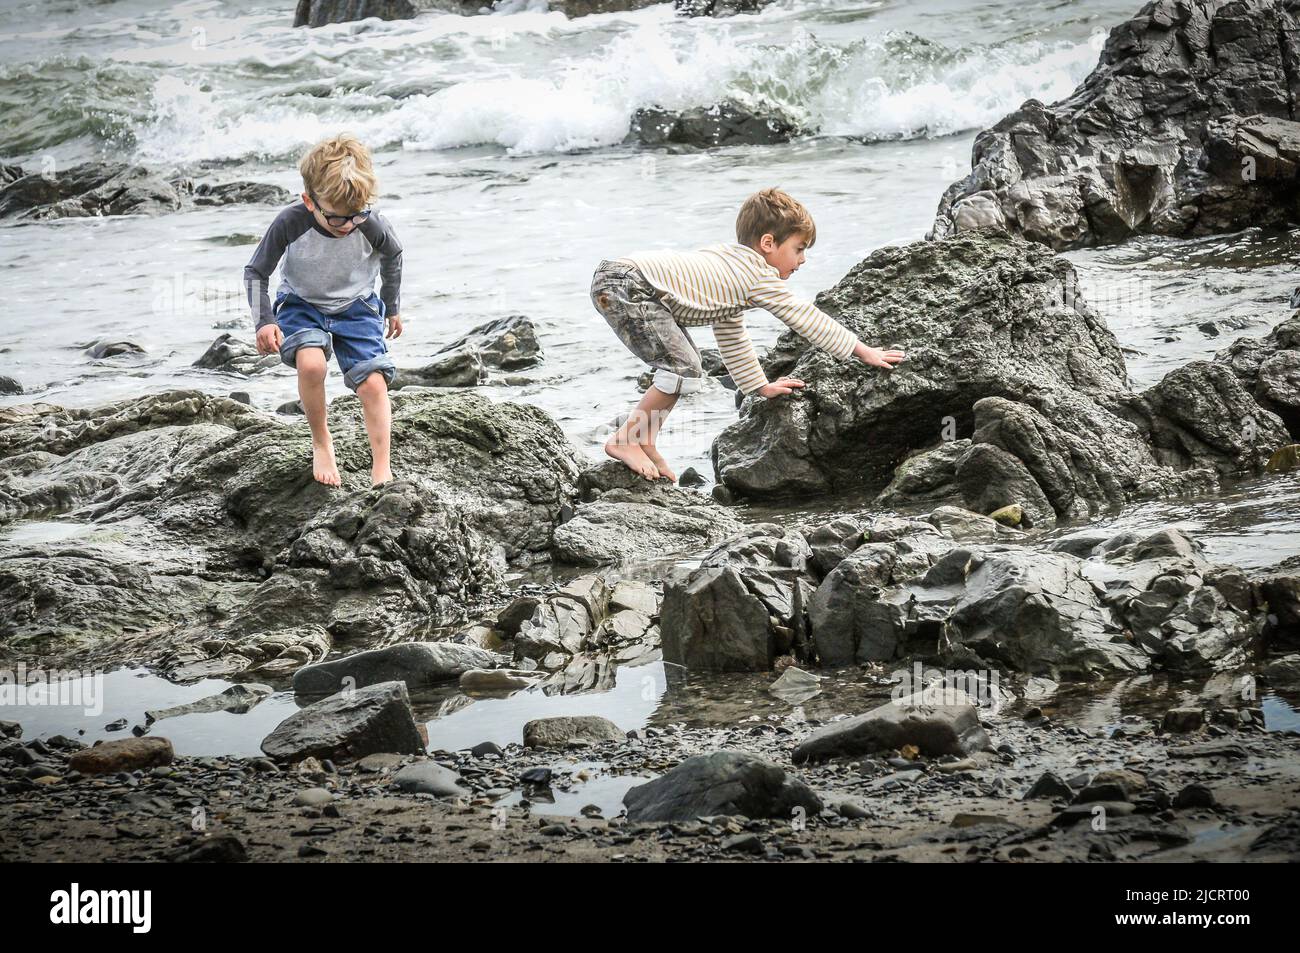 Little boys find rocks to go climbing on, add water, and it is a day of pure fun. Their feet may be a little sore at the days end, but what fun. Stock Photo